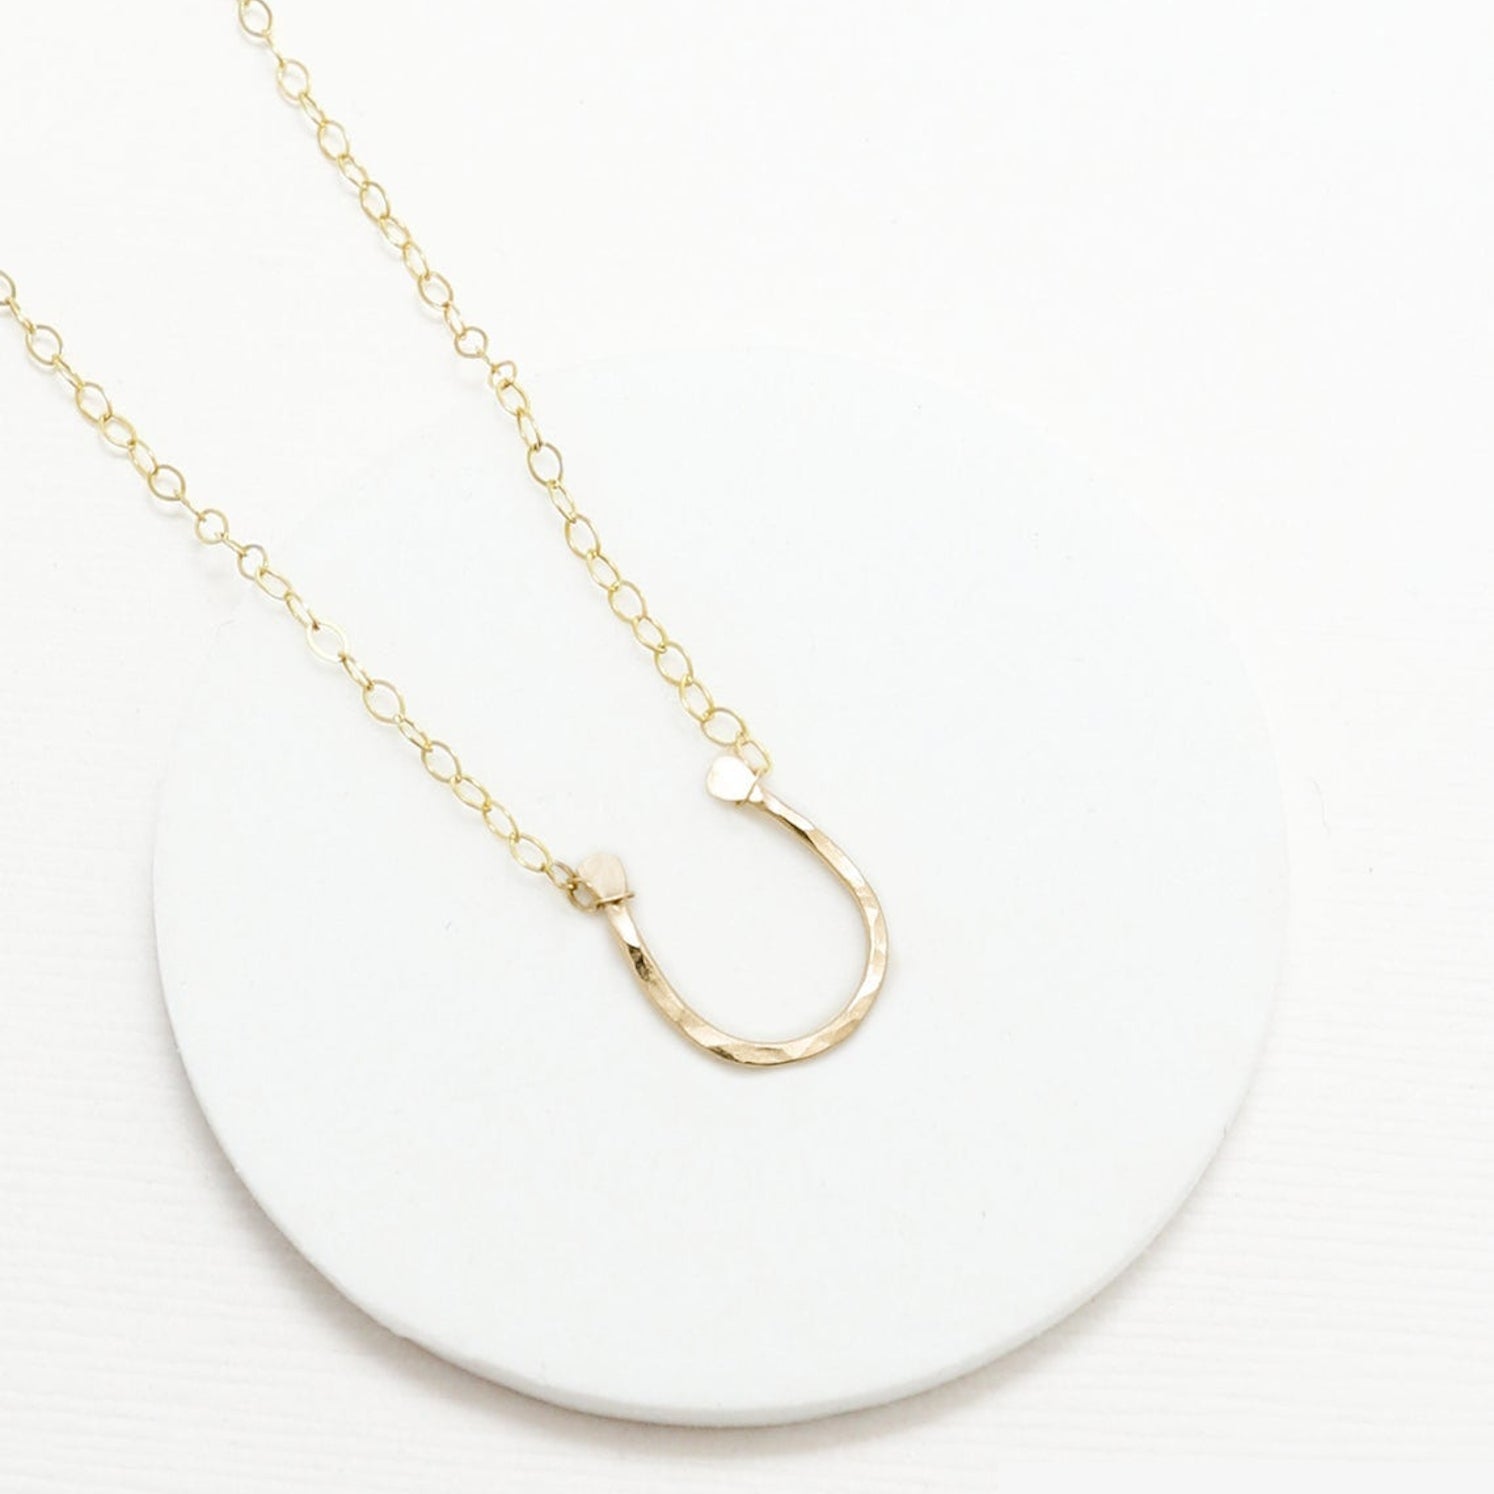 7thHeaven Hammered Necklace